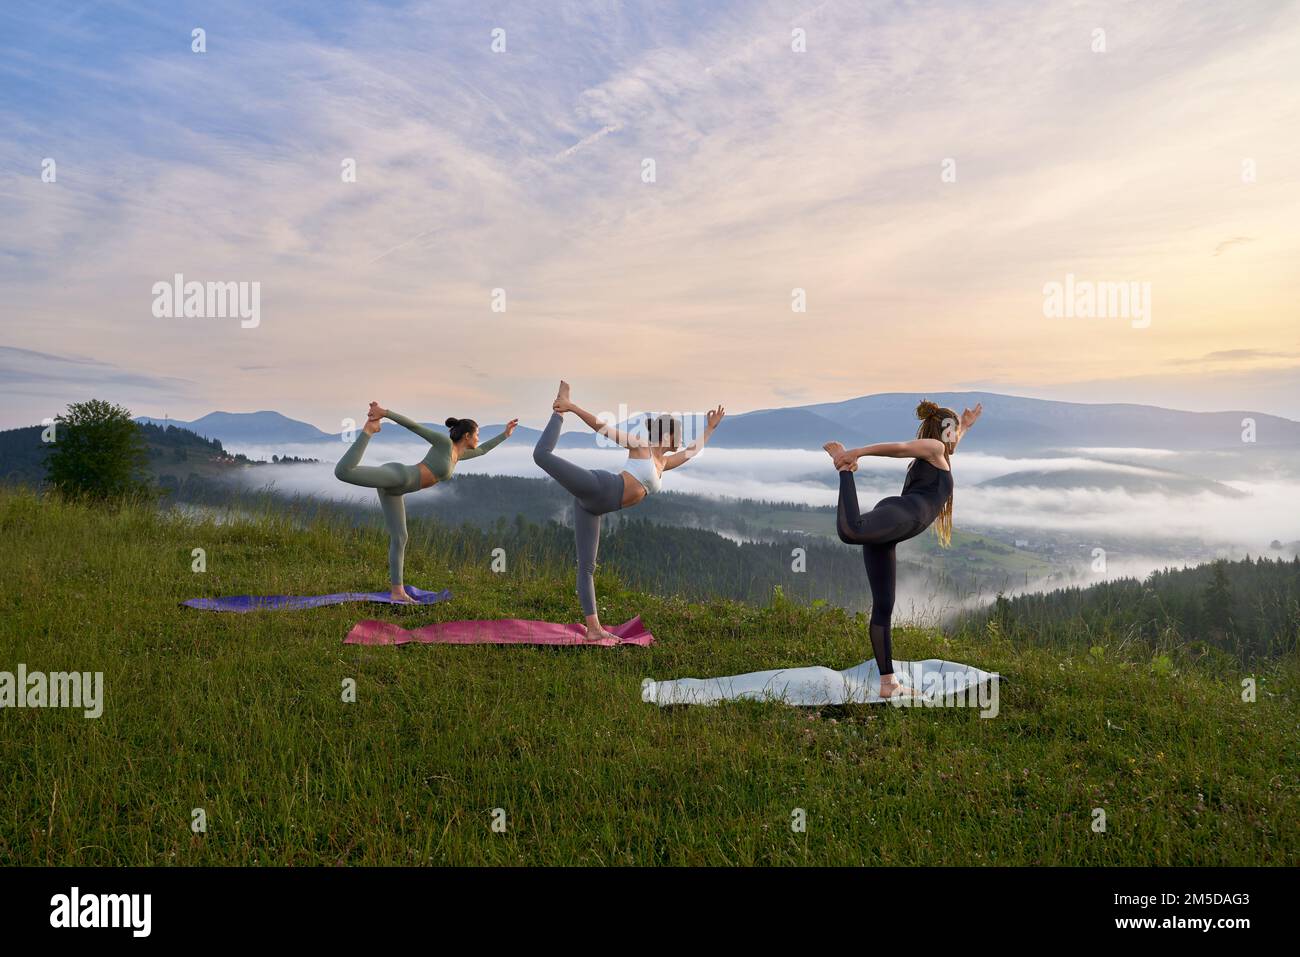 Three sporty women doing exercises for balance on yoga mat amonu summer mountains. Group of young females in sport clothes having outdoors workout together. Stock Photo